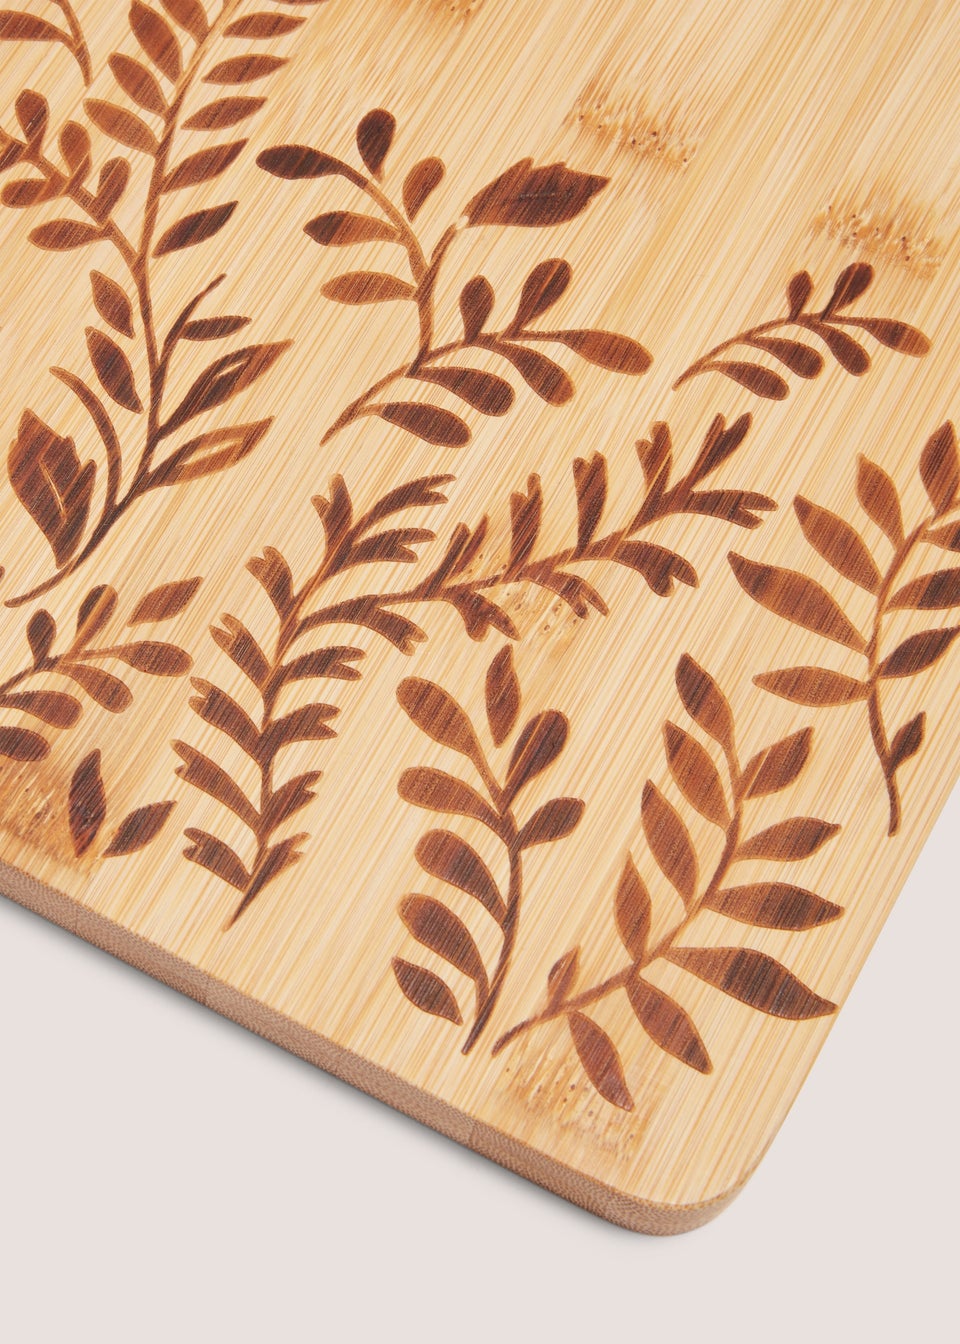 Floral Embossed Chopping Board (41cm x 22cm)